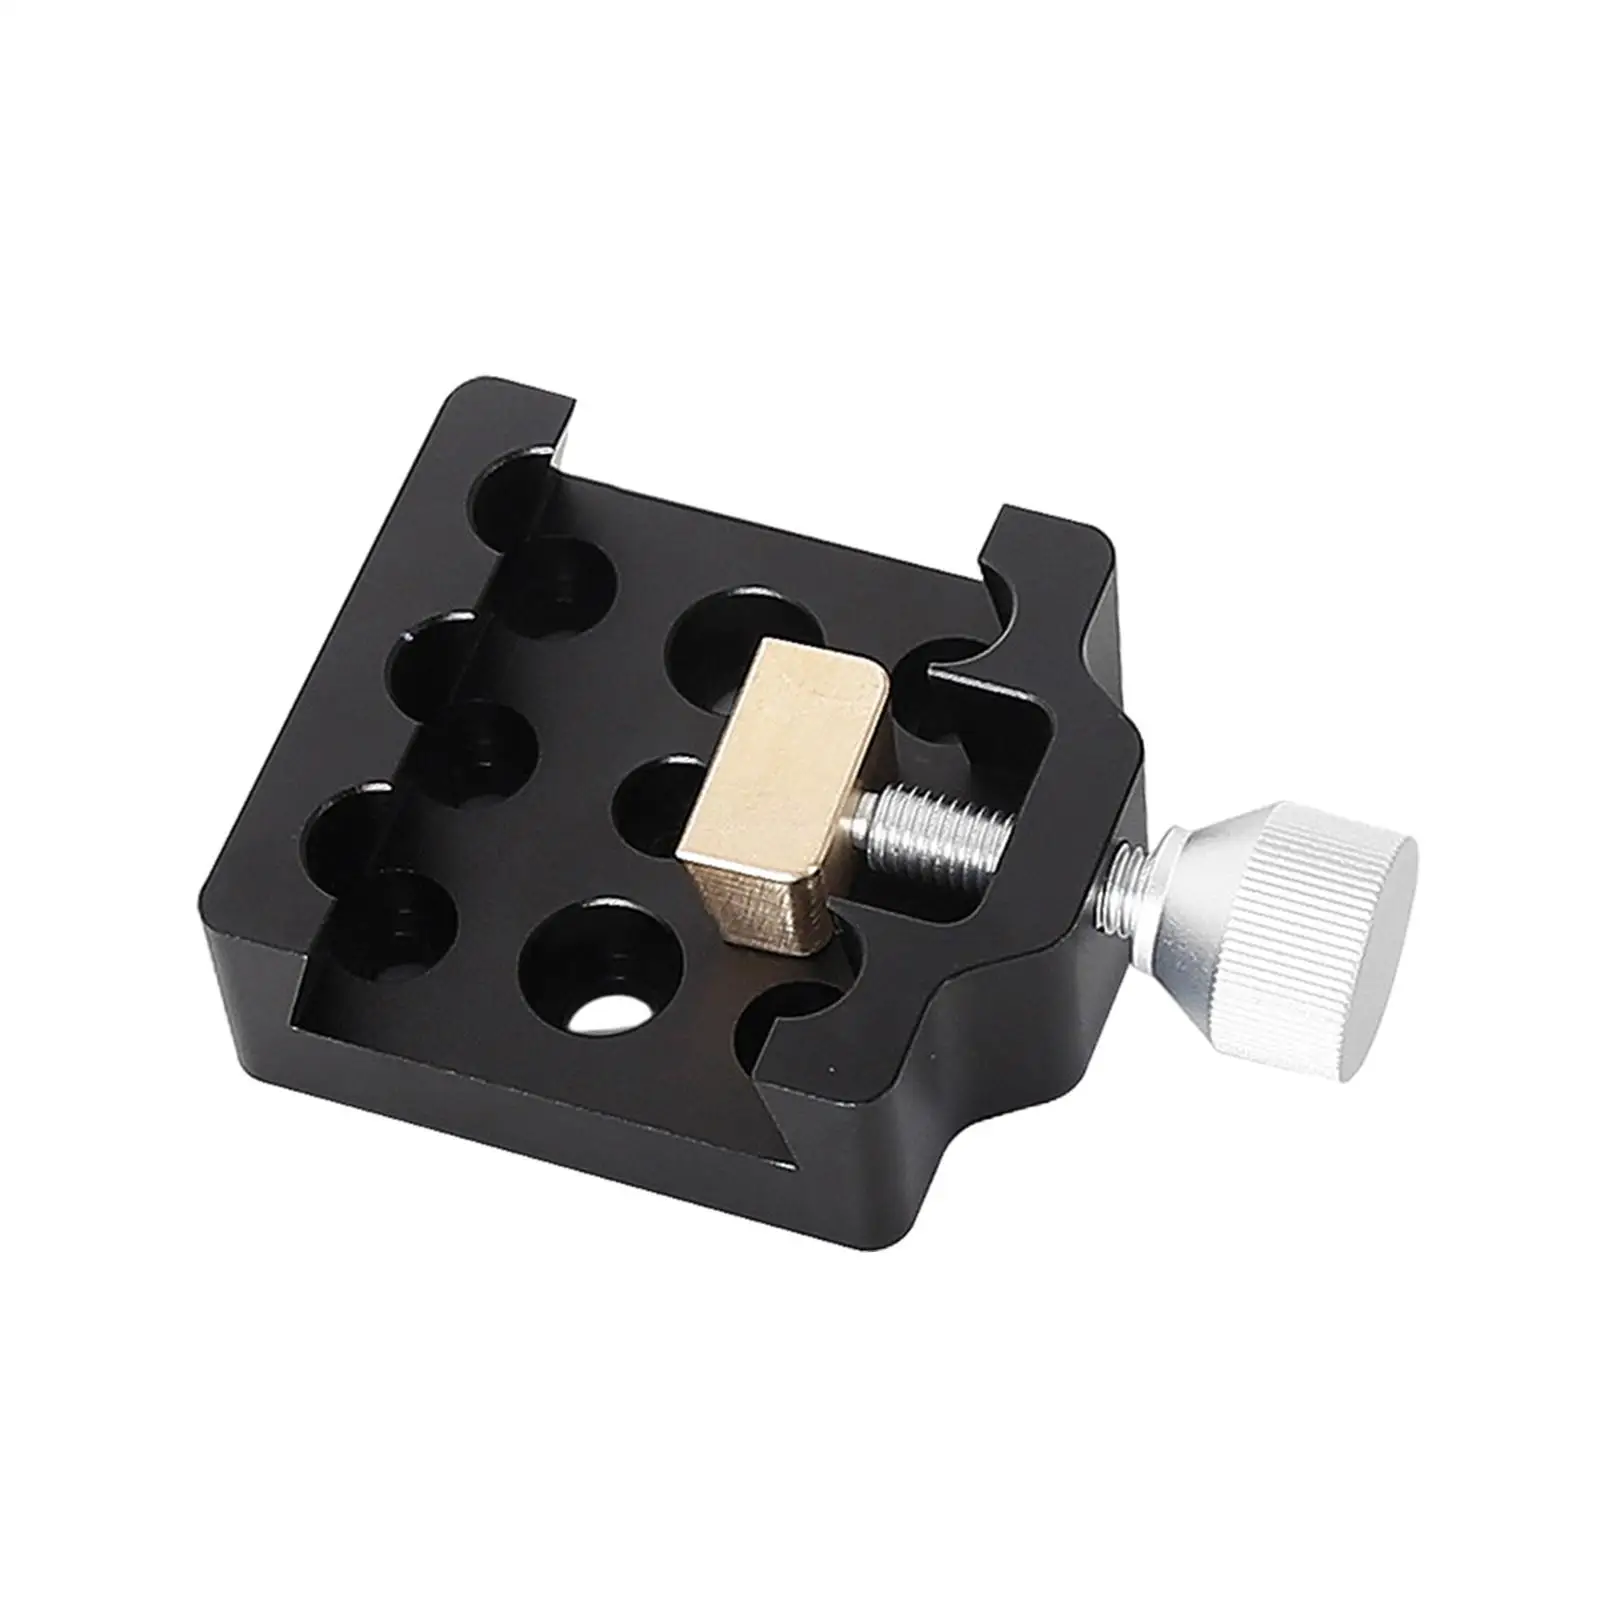 Telescope Scope Adapter Mount Base Metal Universal for Astronomical Tripod